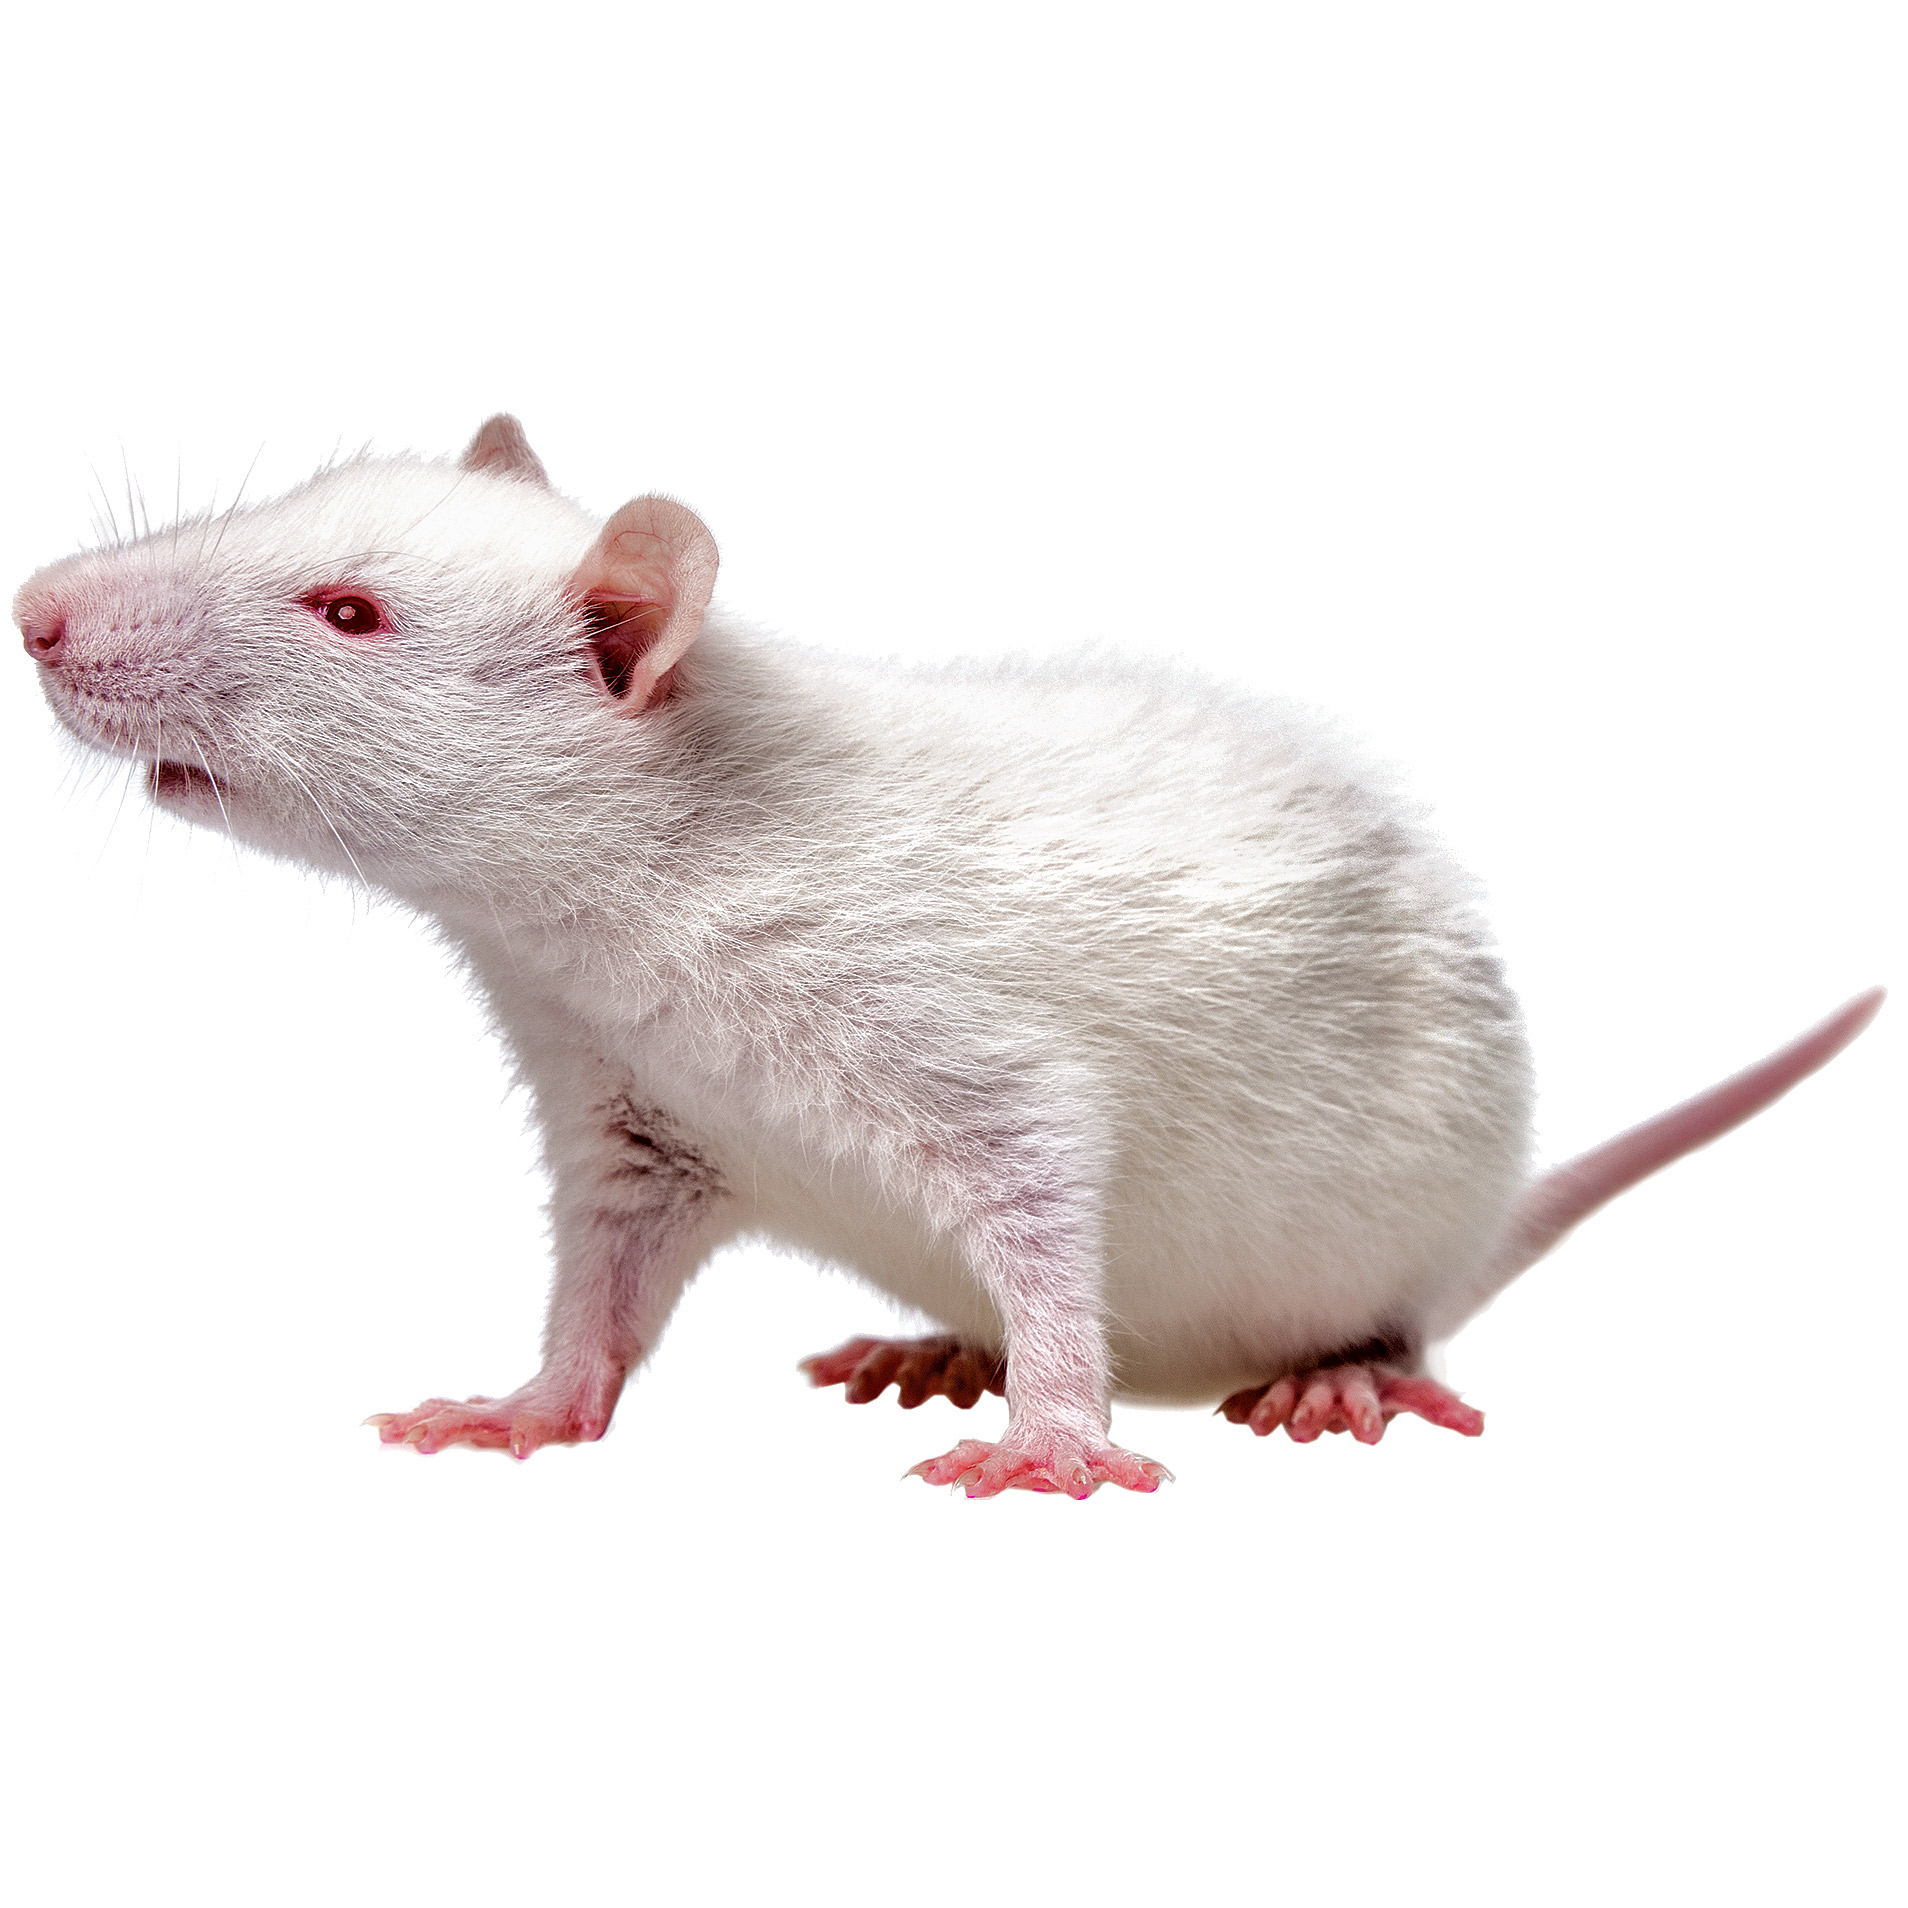 World's Oldest Lab Rats Contribute to Anti-Aging Research - Bloomberg